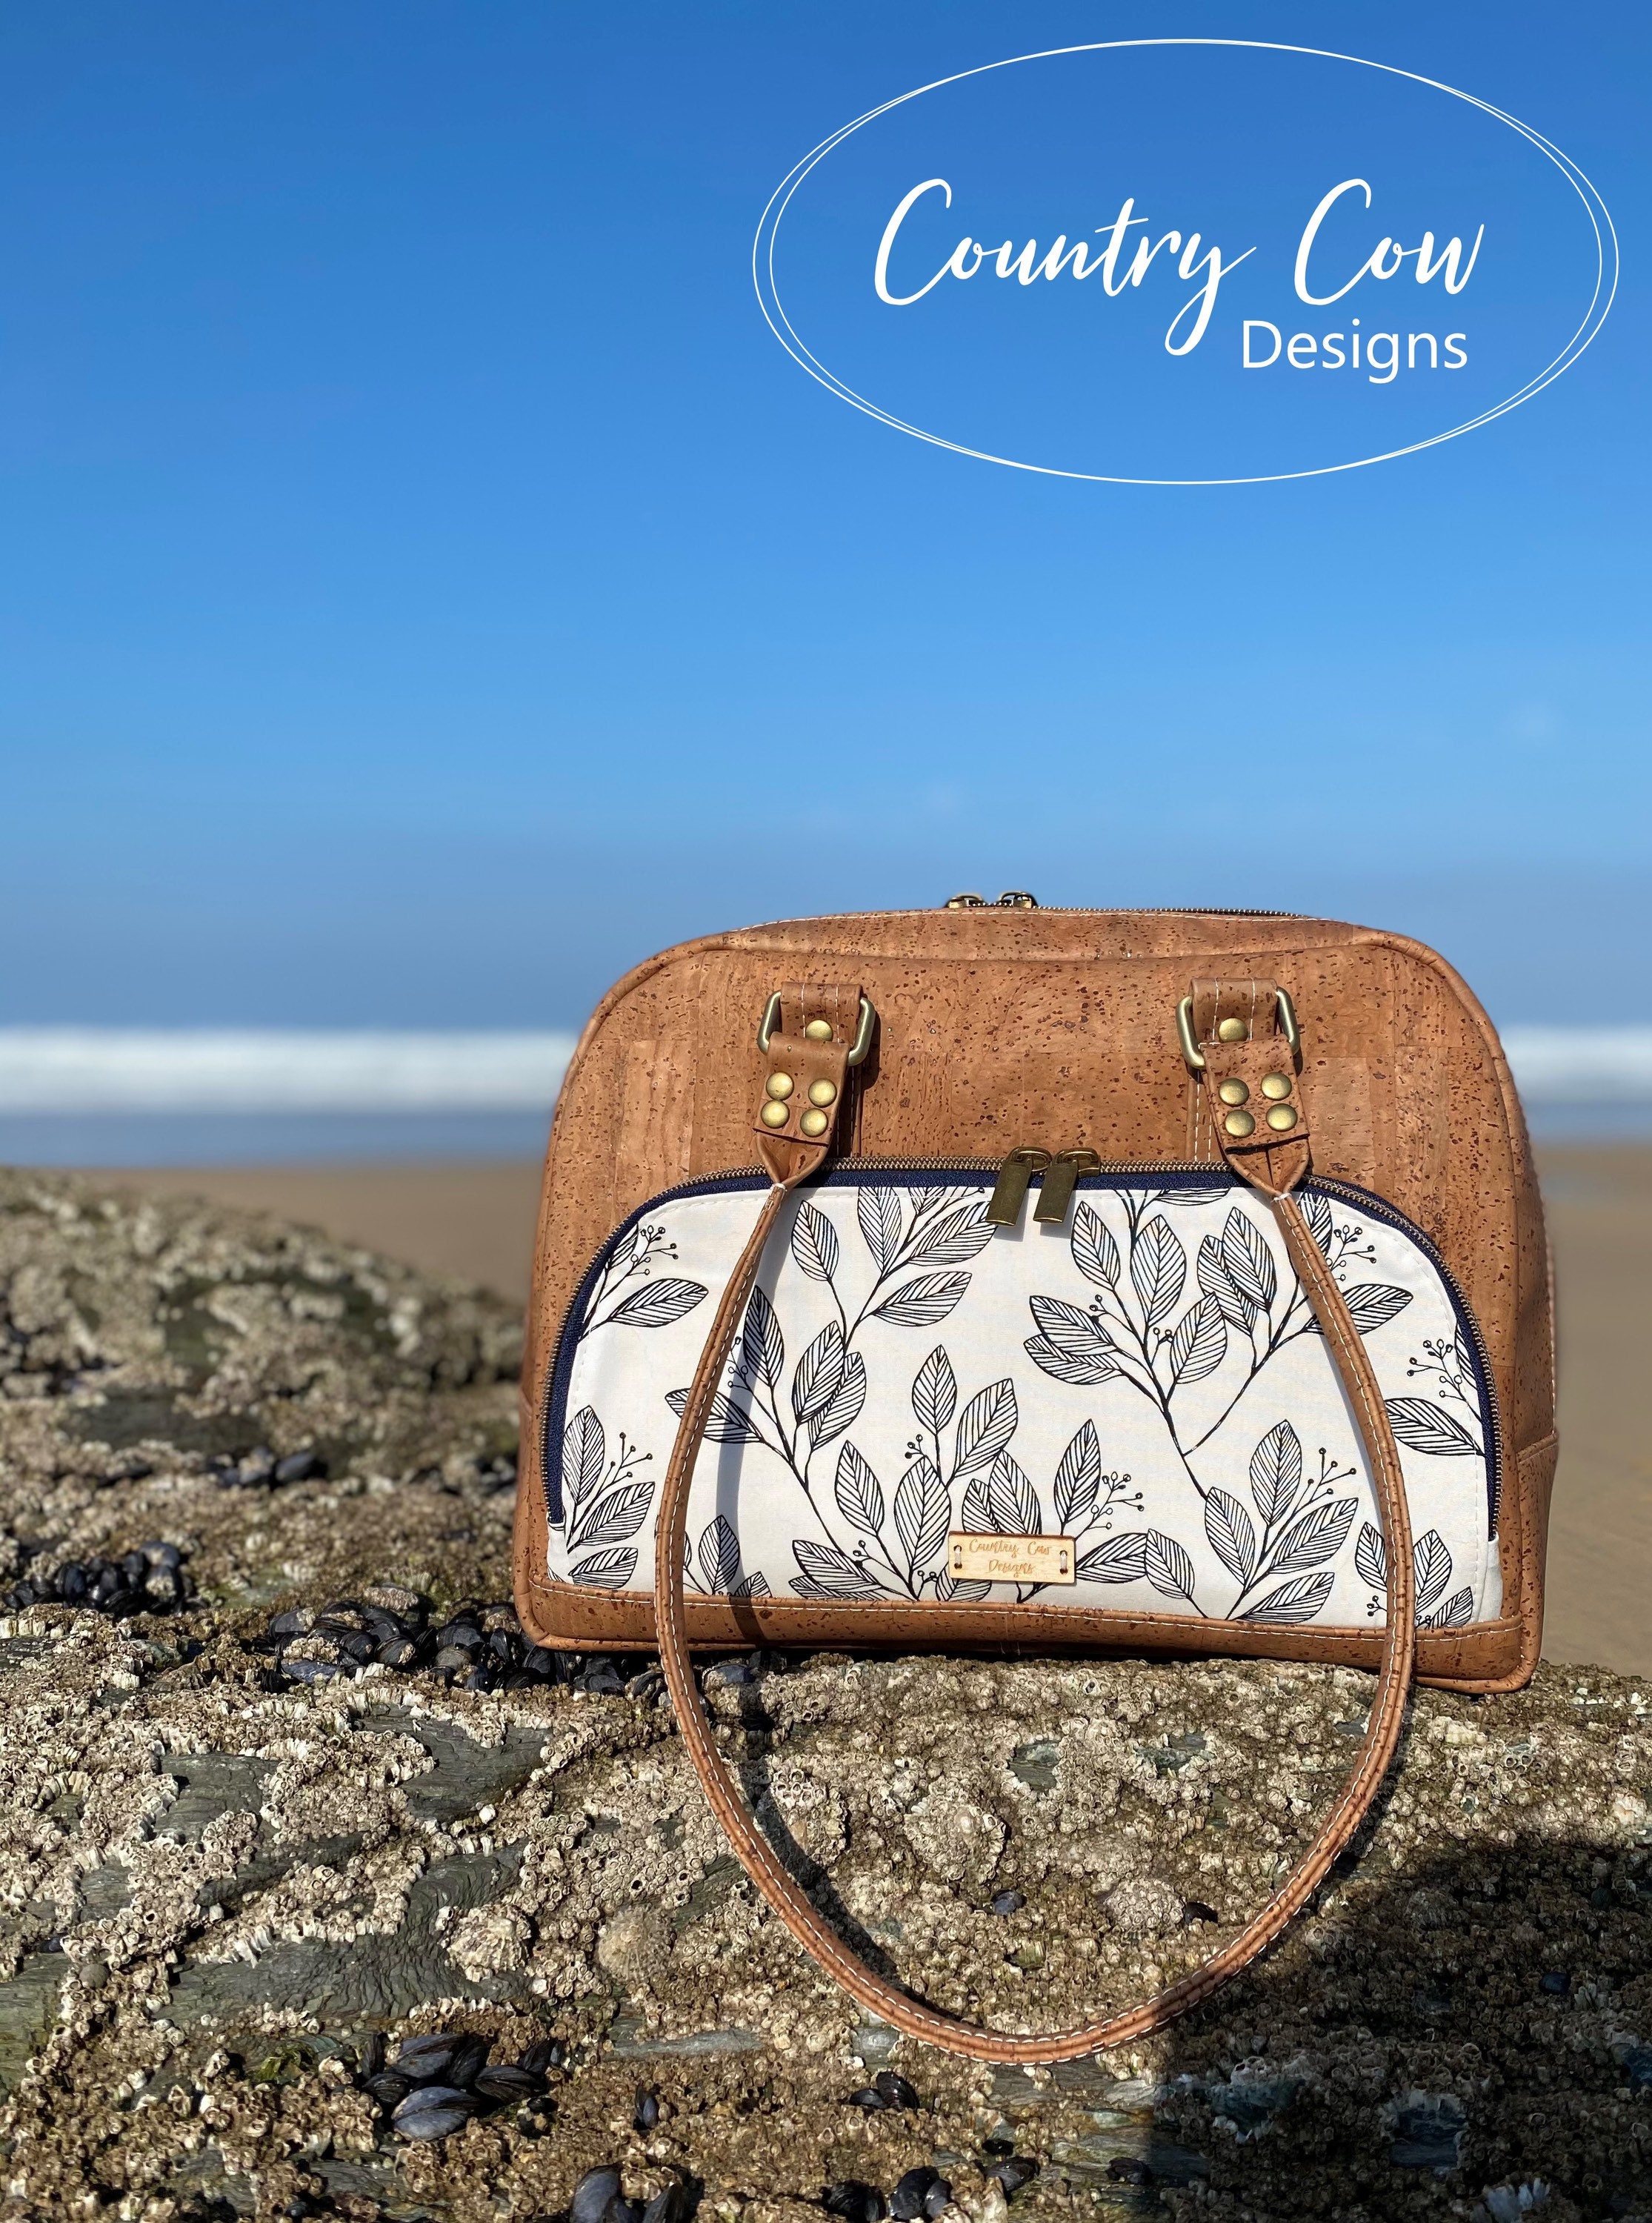 The Bowler Bag Sewing Pattern Quilting Patterns – Quilting Books Patterns  and Notions